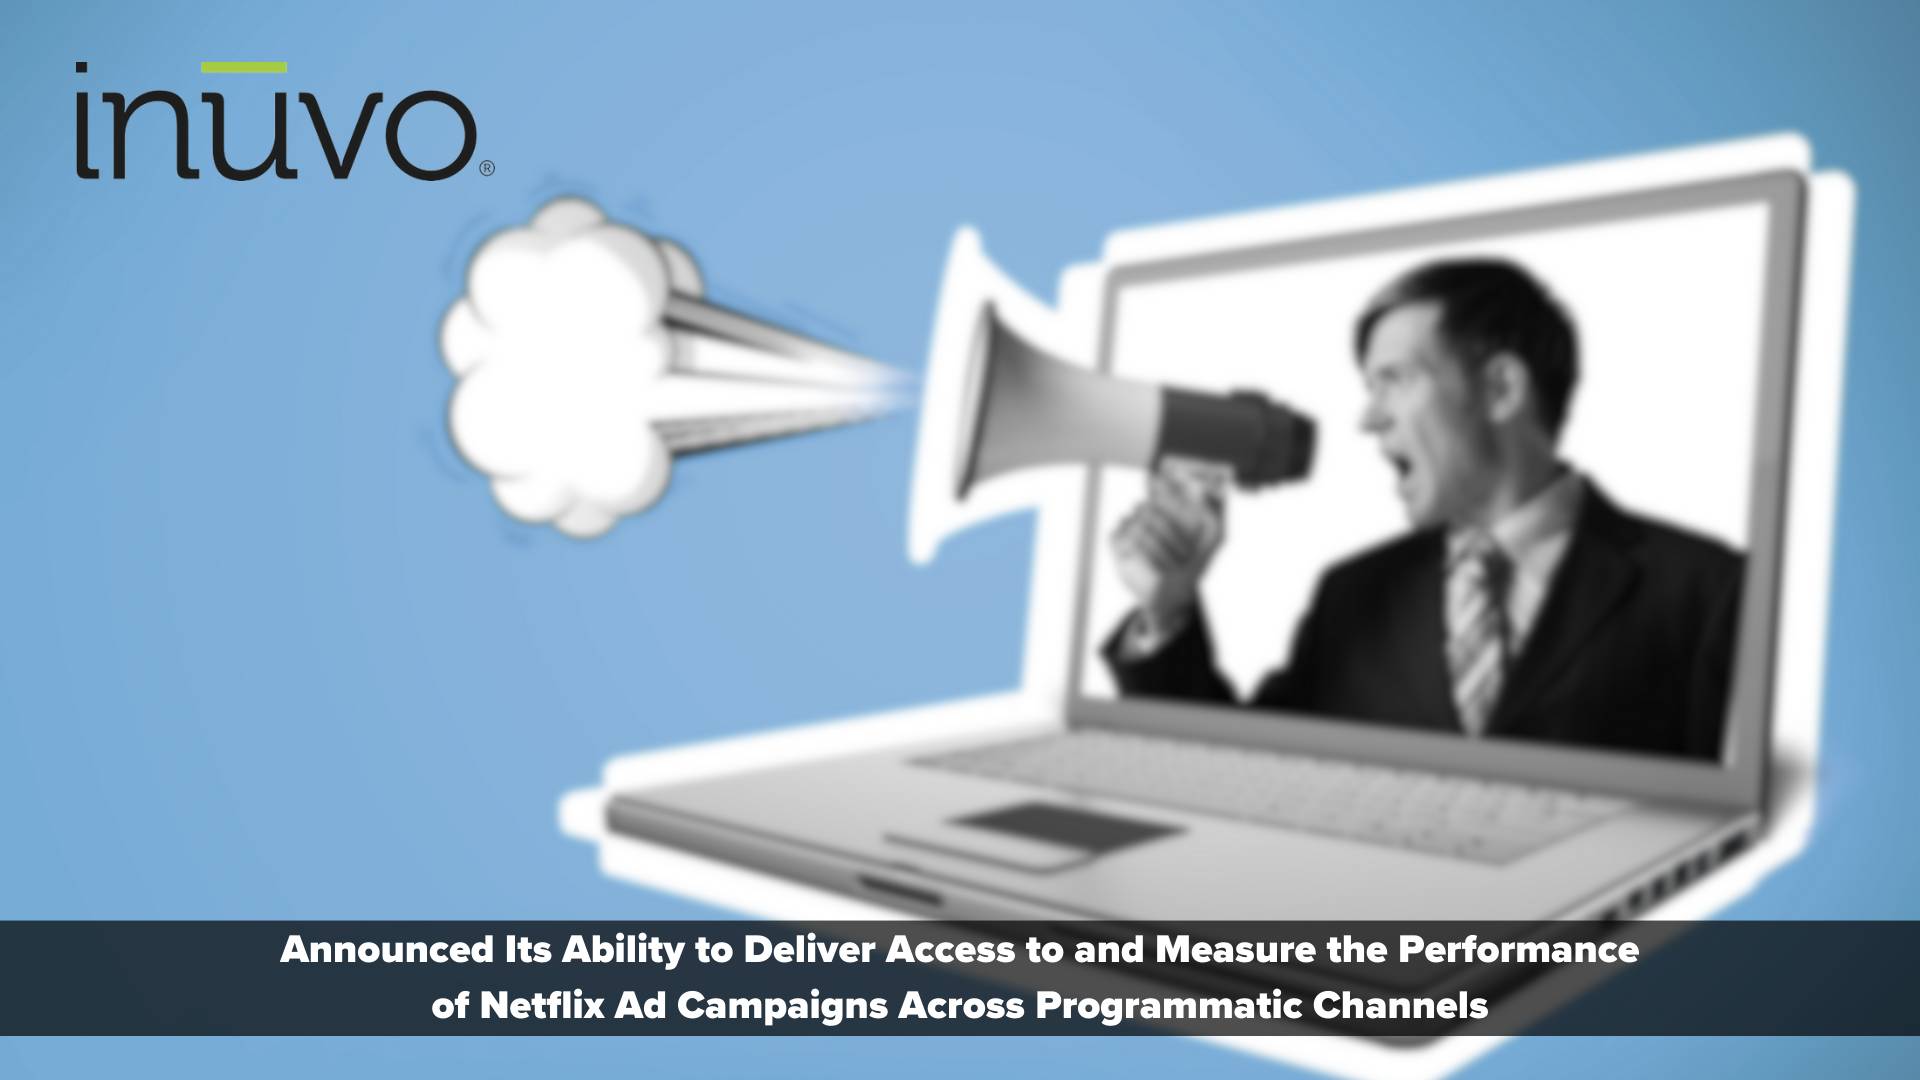 Inuvo Now Provides Advertisers the Ability to Measure Performance of Netflix Ad Campaigns Across Programmatic Channels